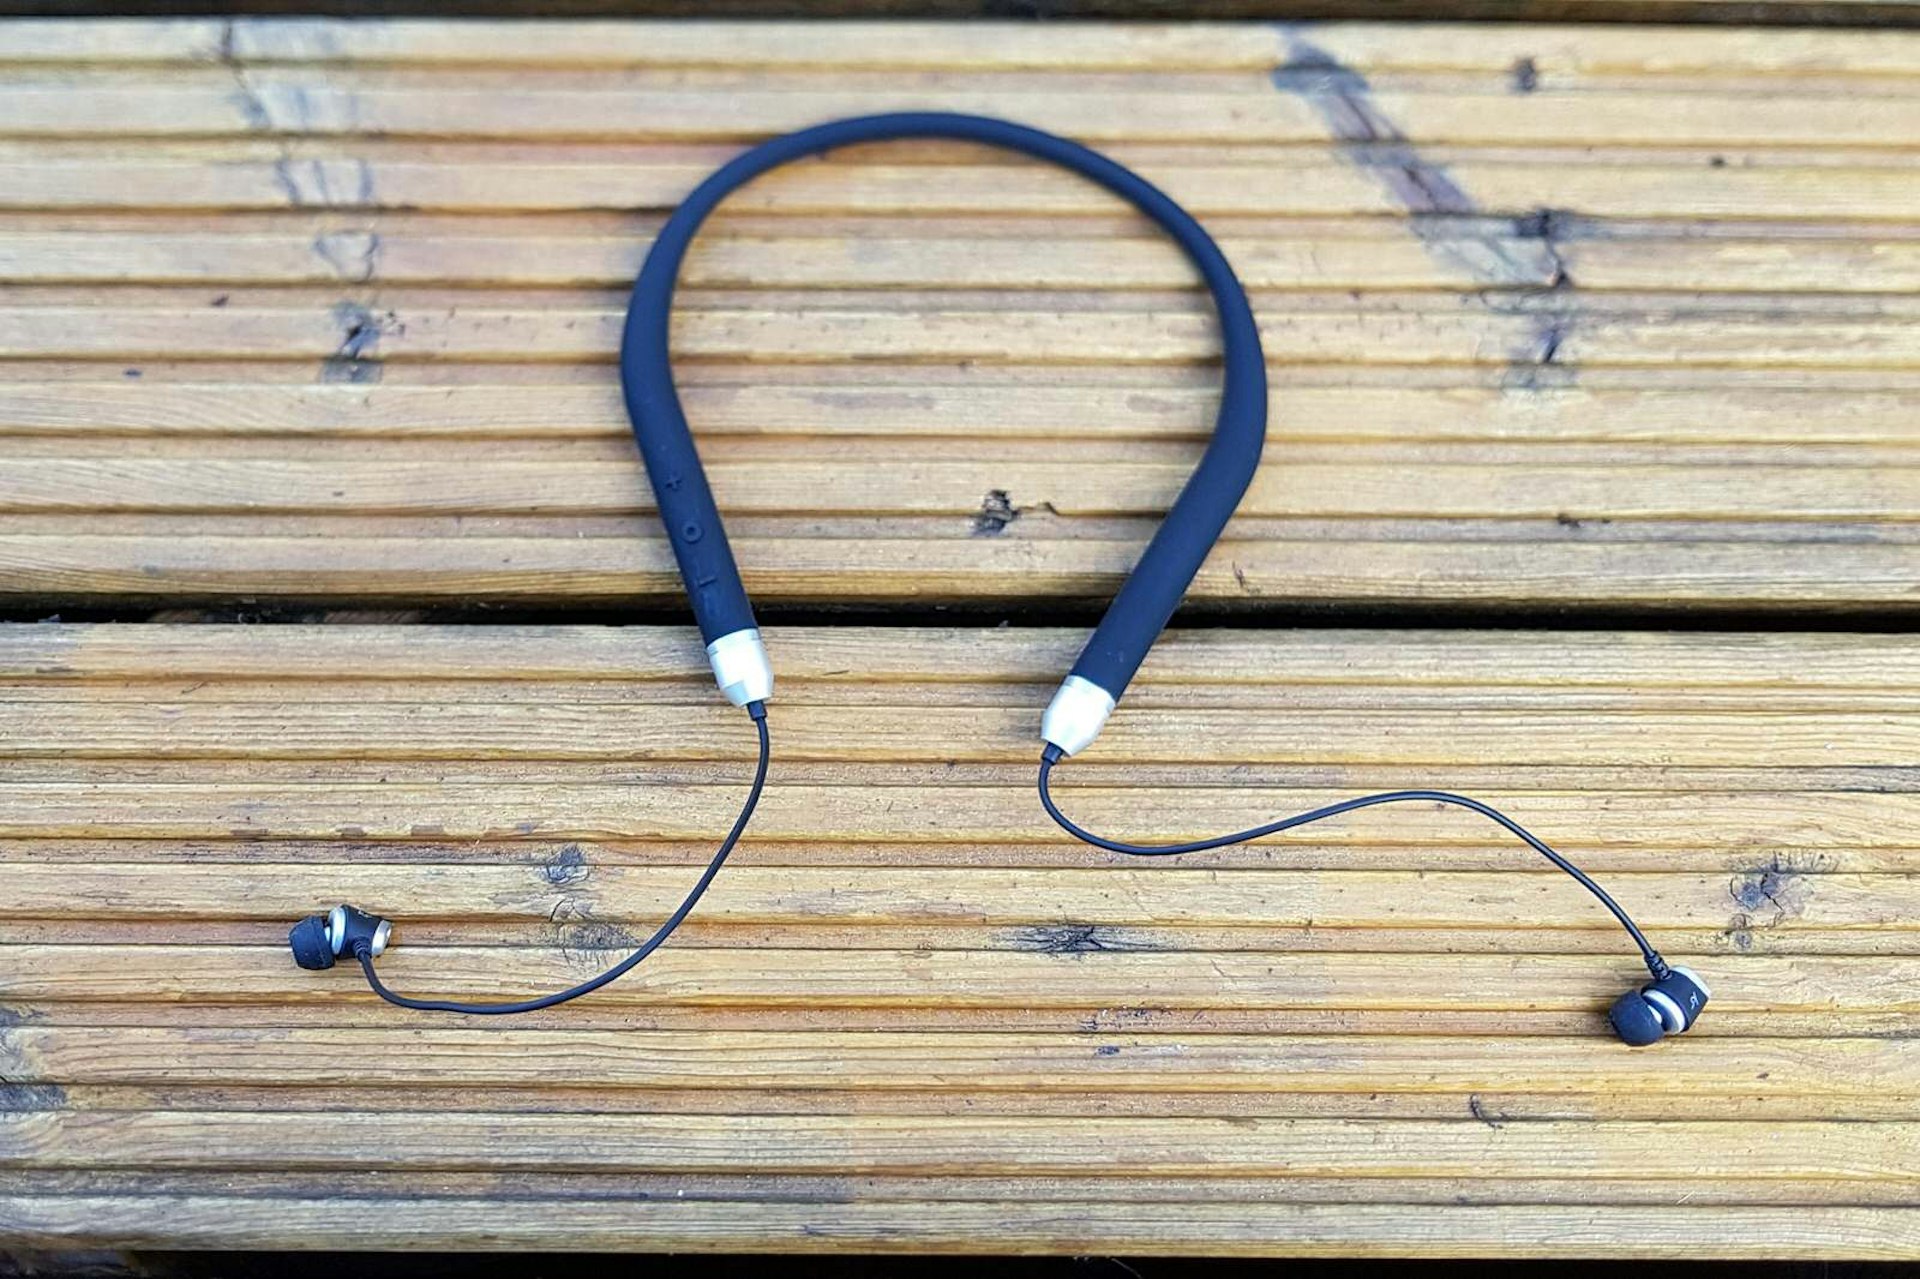 Kinetic Neckband Earphones from Kitsound, shown with black 'band' that rests on the back of the neck